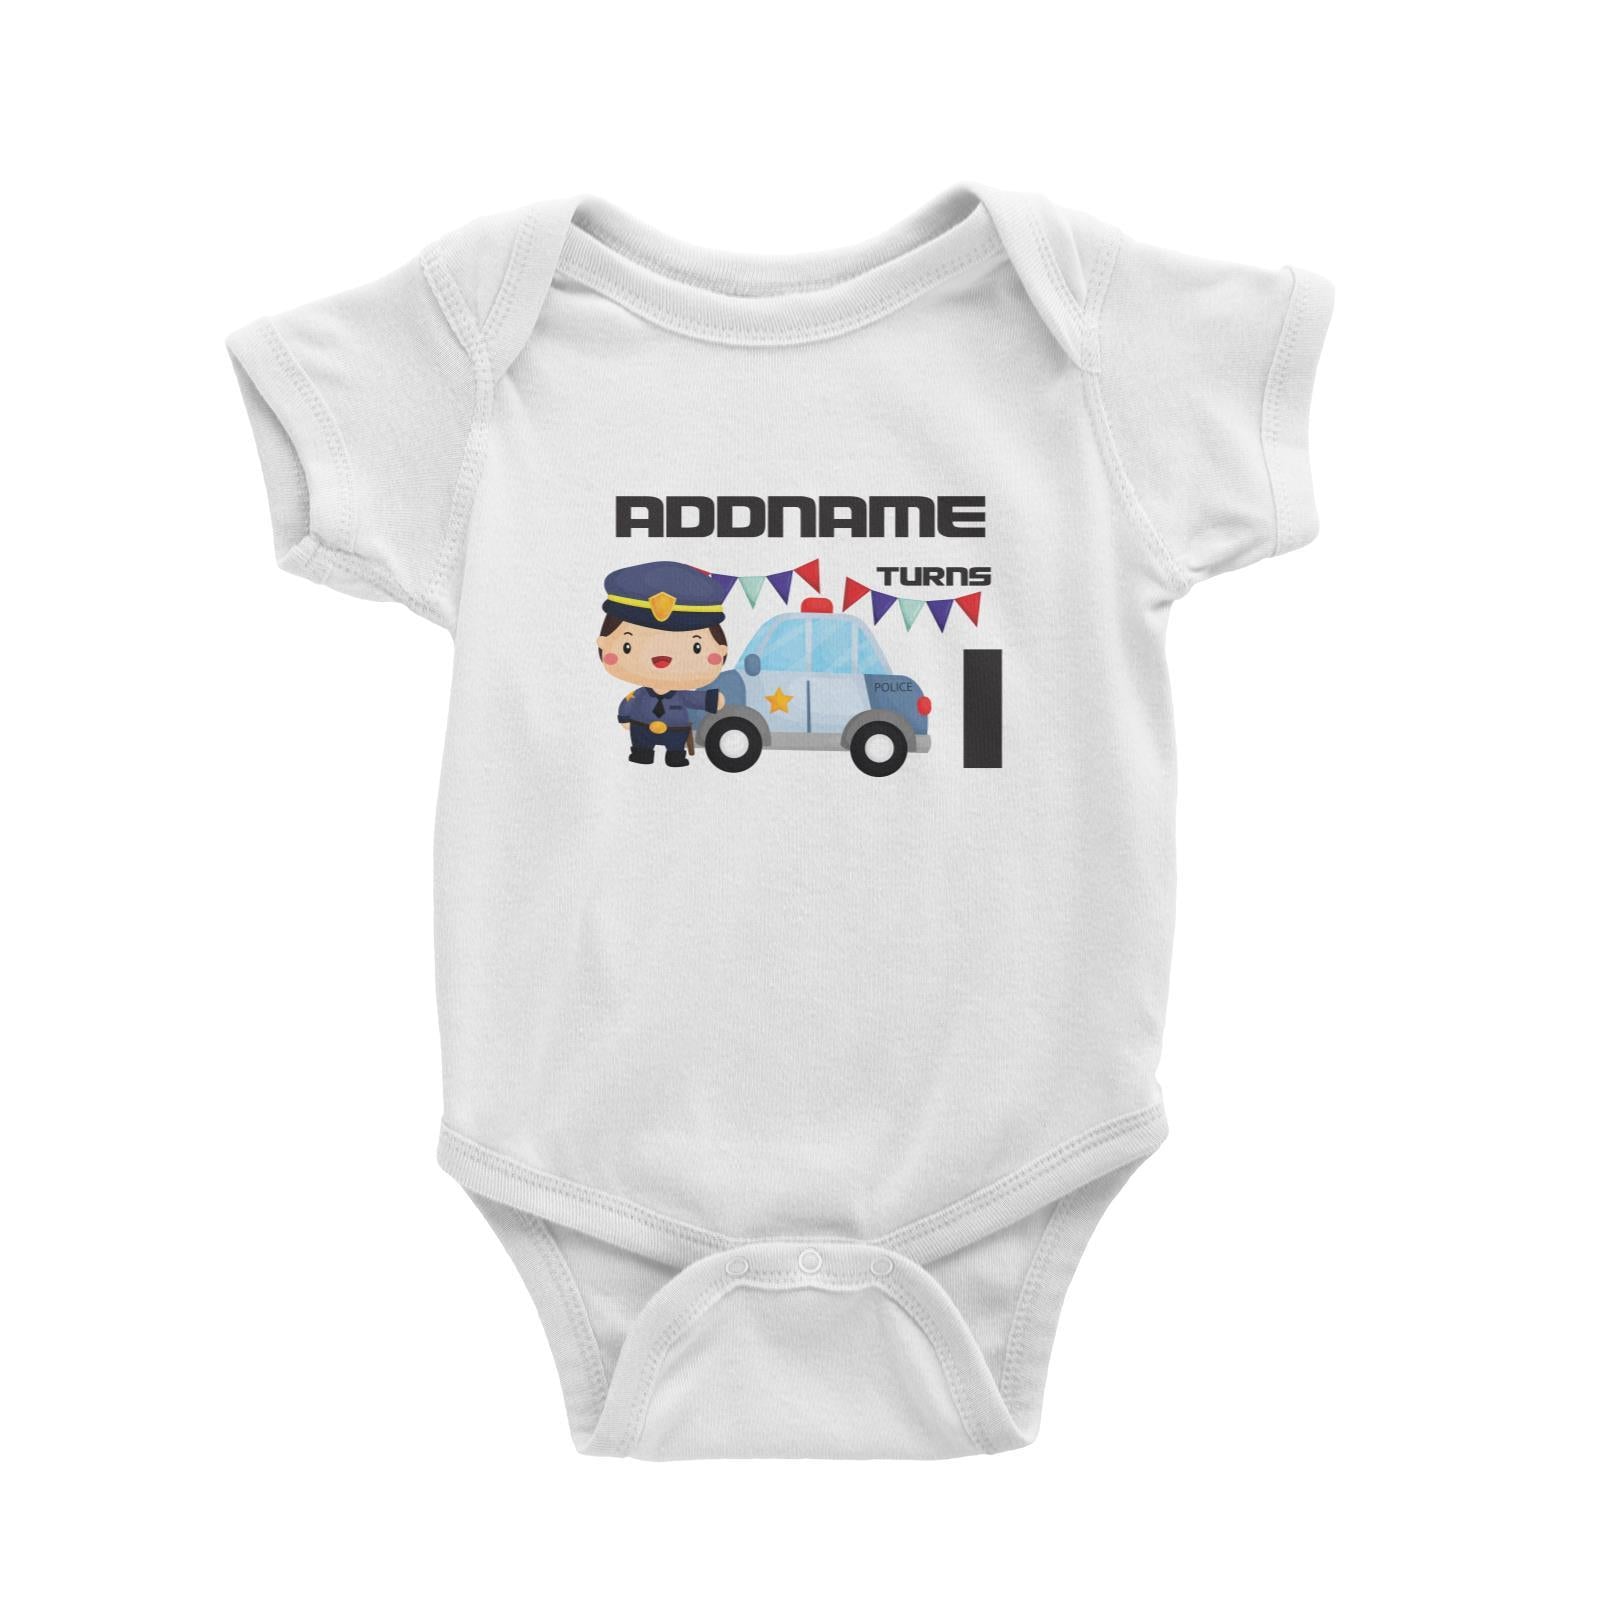 Birthday Police Officer Boy In Suit With Police Car Addname Turns 1 Baby Romper